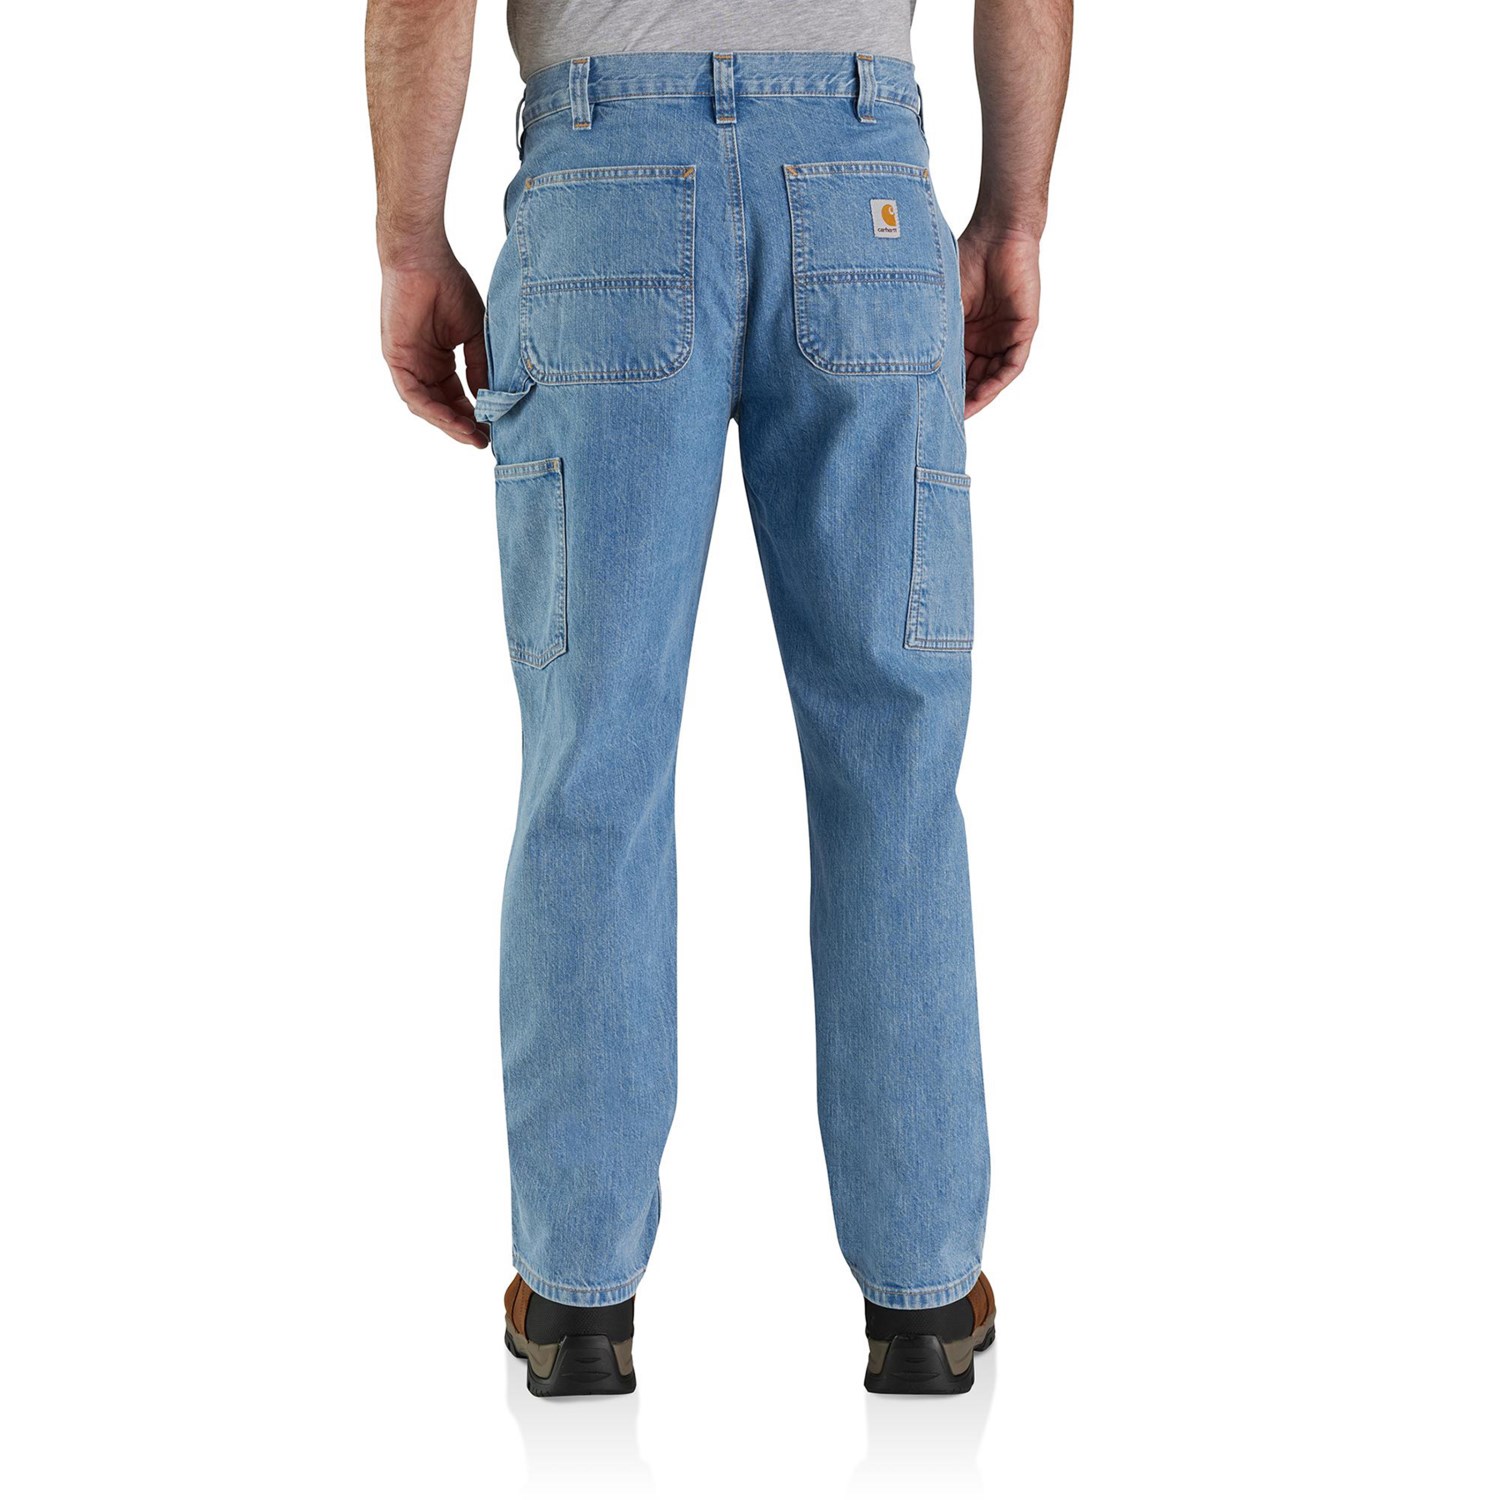 Carhartt 104941 Loose Fit Utility Jeans - Factory Seconds